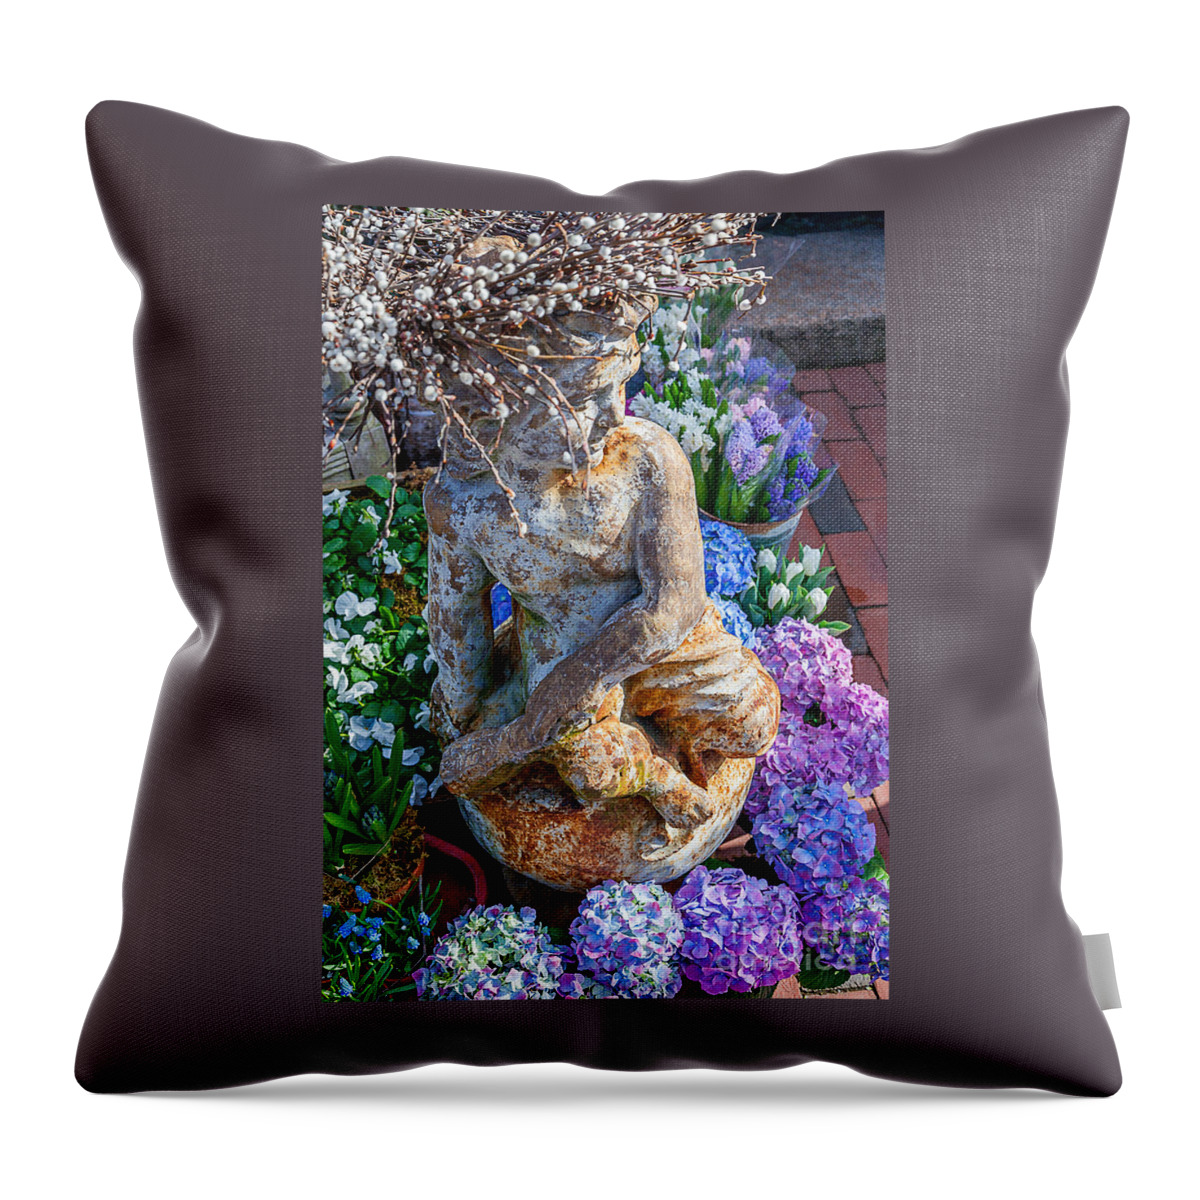 America Throw Pillow featuring the photograph Garden Cherub by Susan Cole Kelly